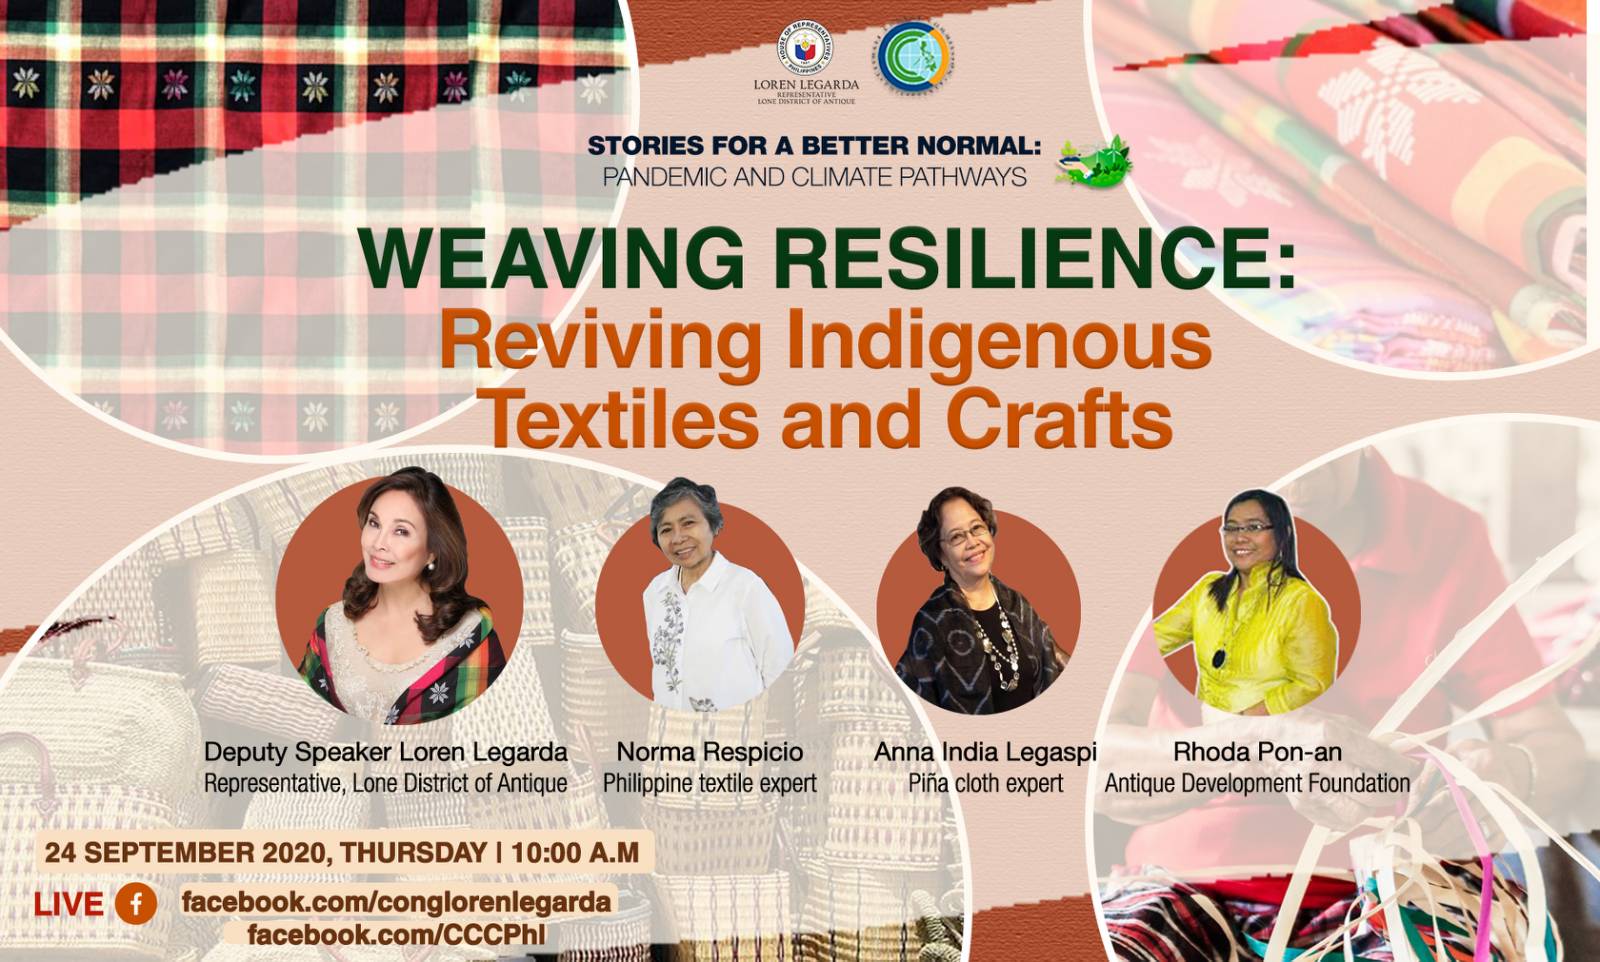 Weaving Resilience: Reviving Indigenous Textiles and Crafts